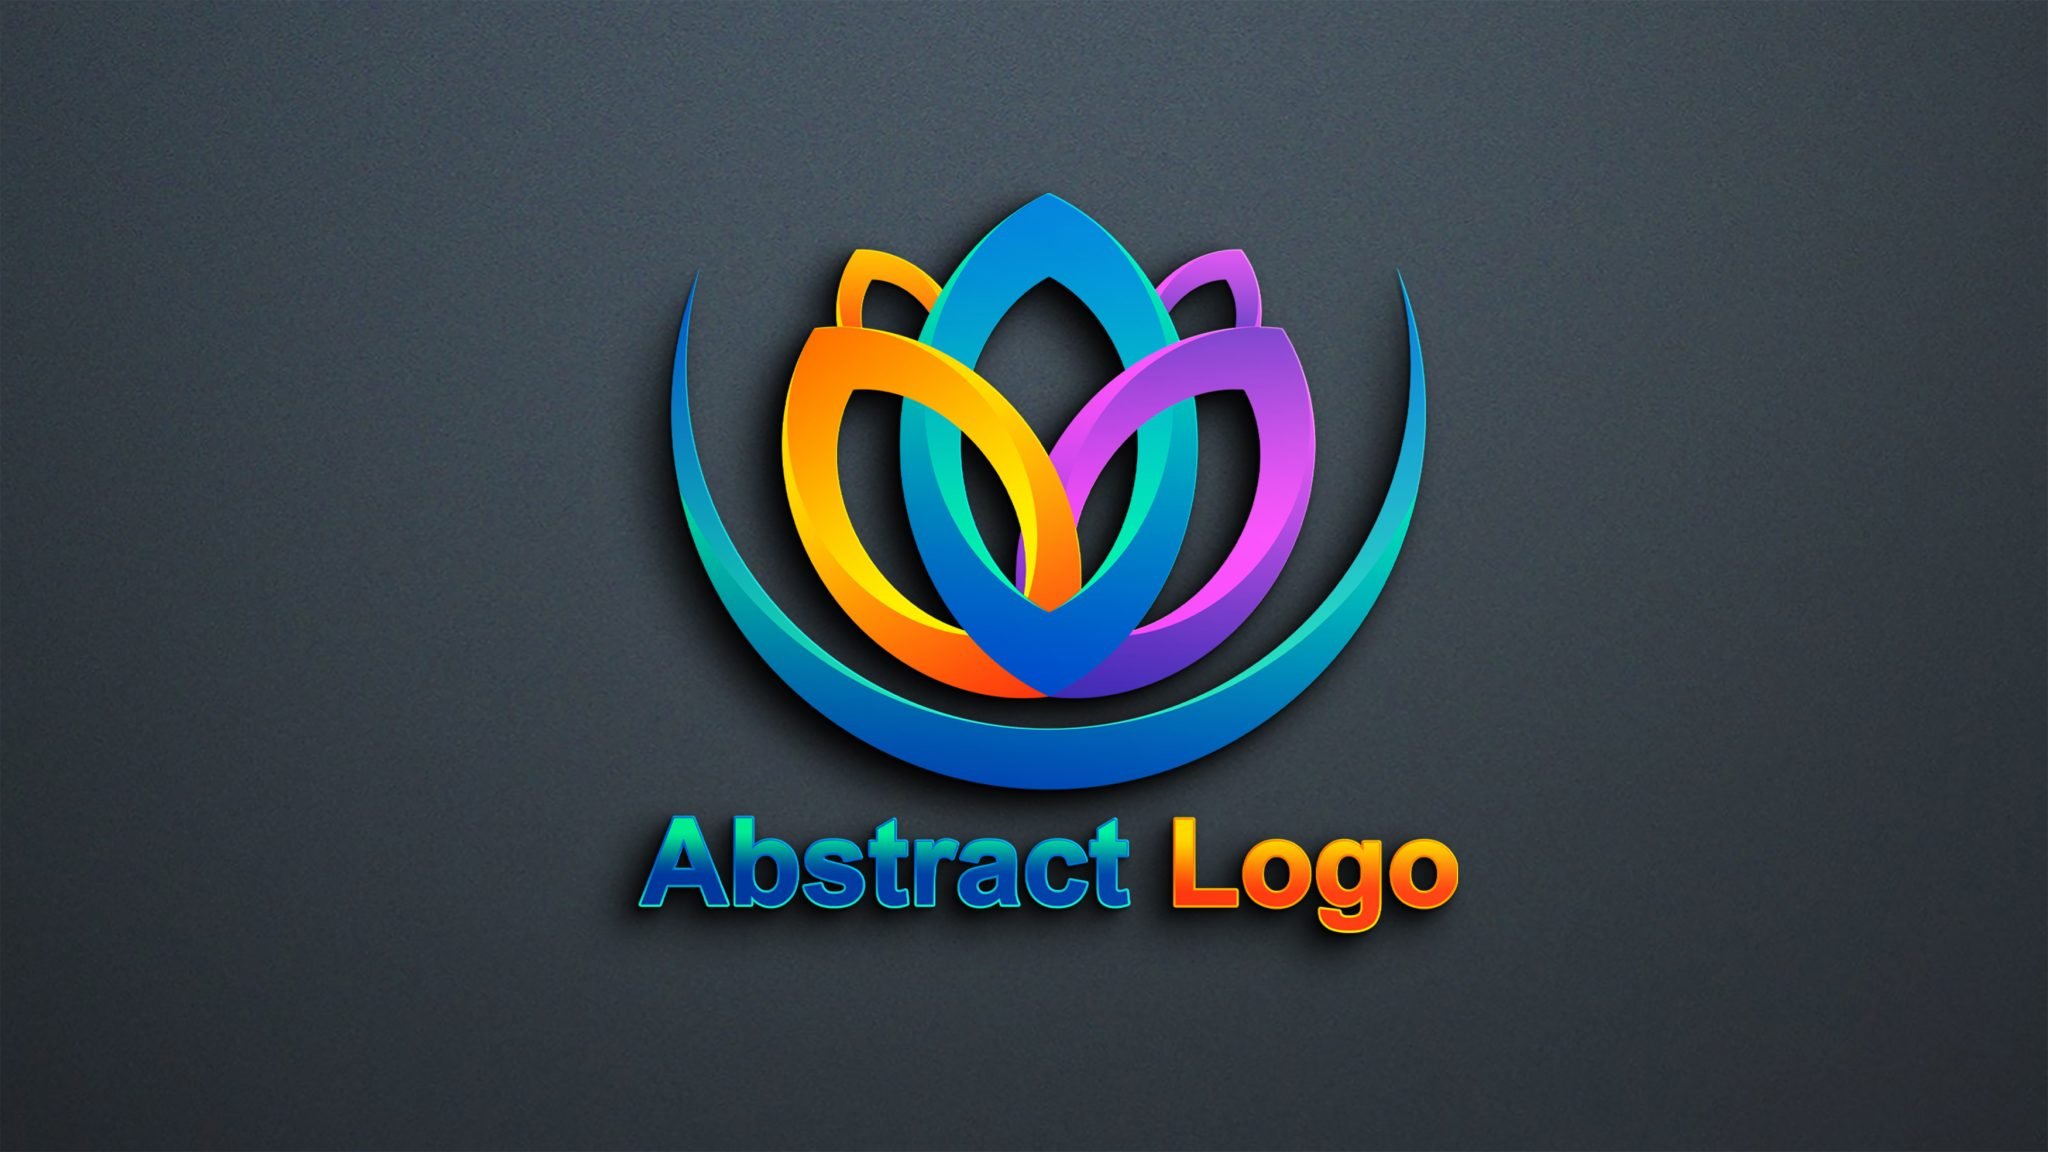 download 27 free photoshop psd logos collection